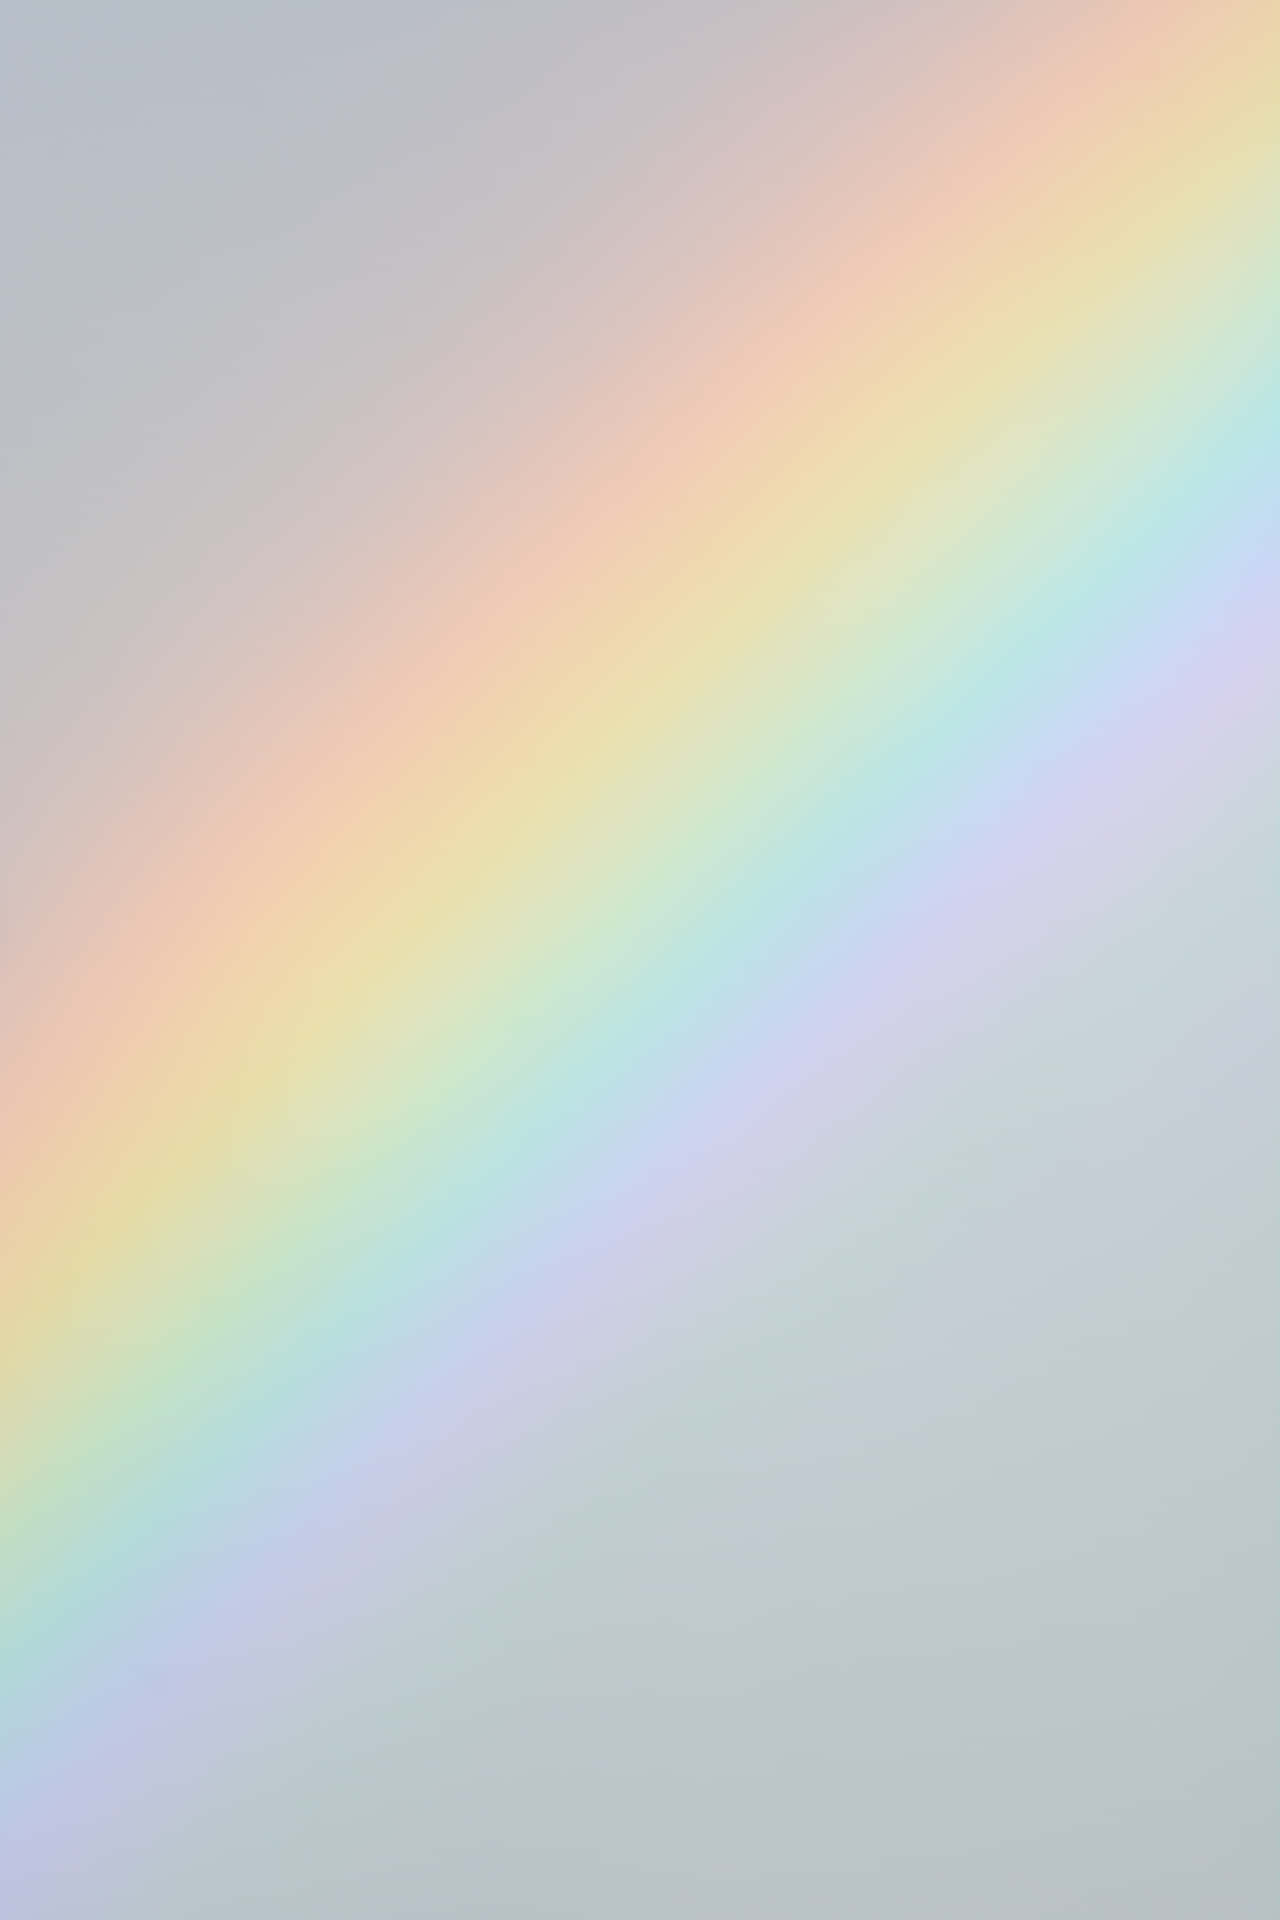 Show your true colors with this beautiful pastel rainbow! Wallpaper